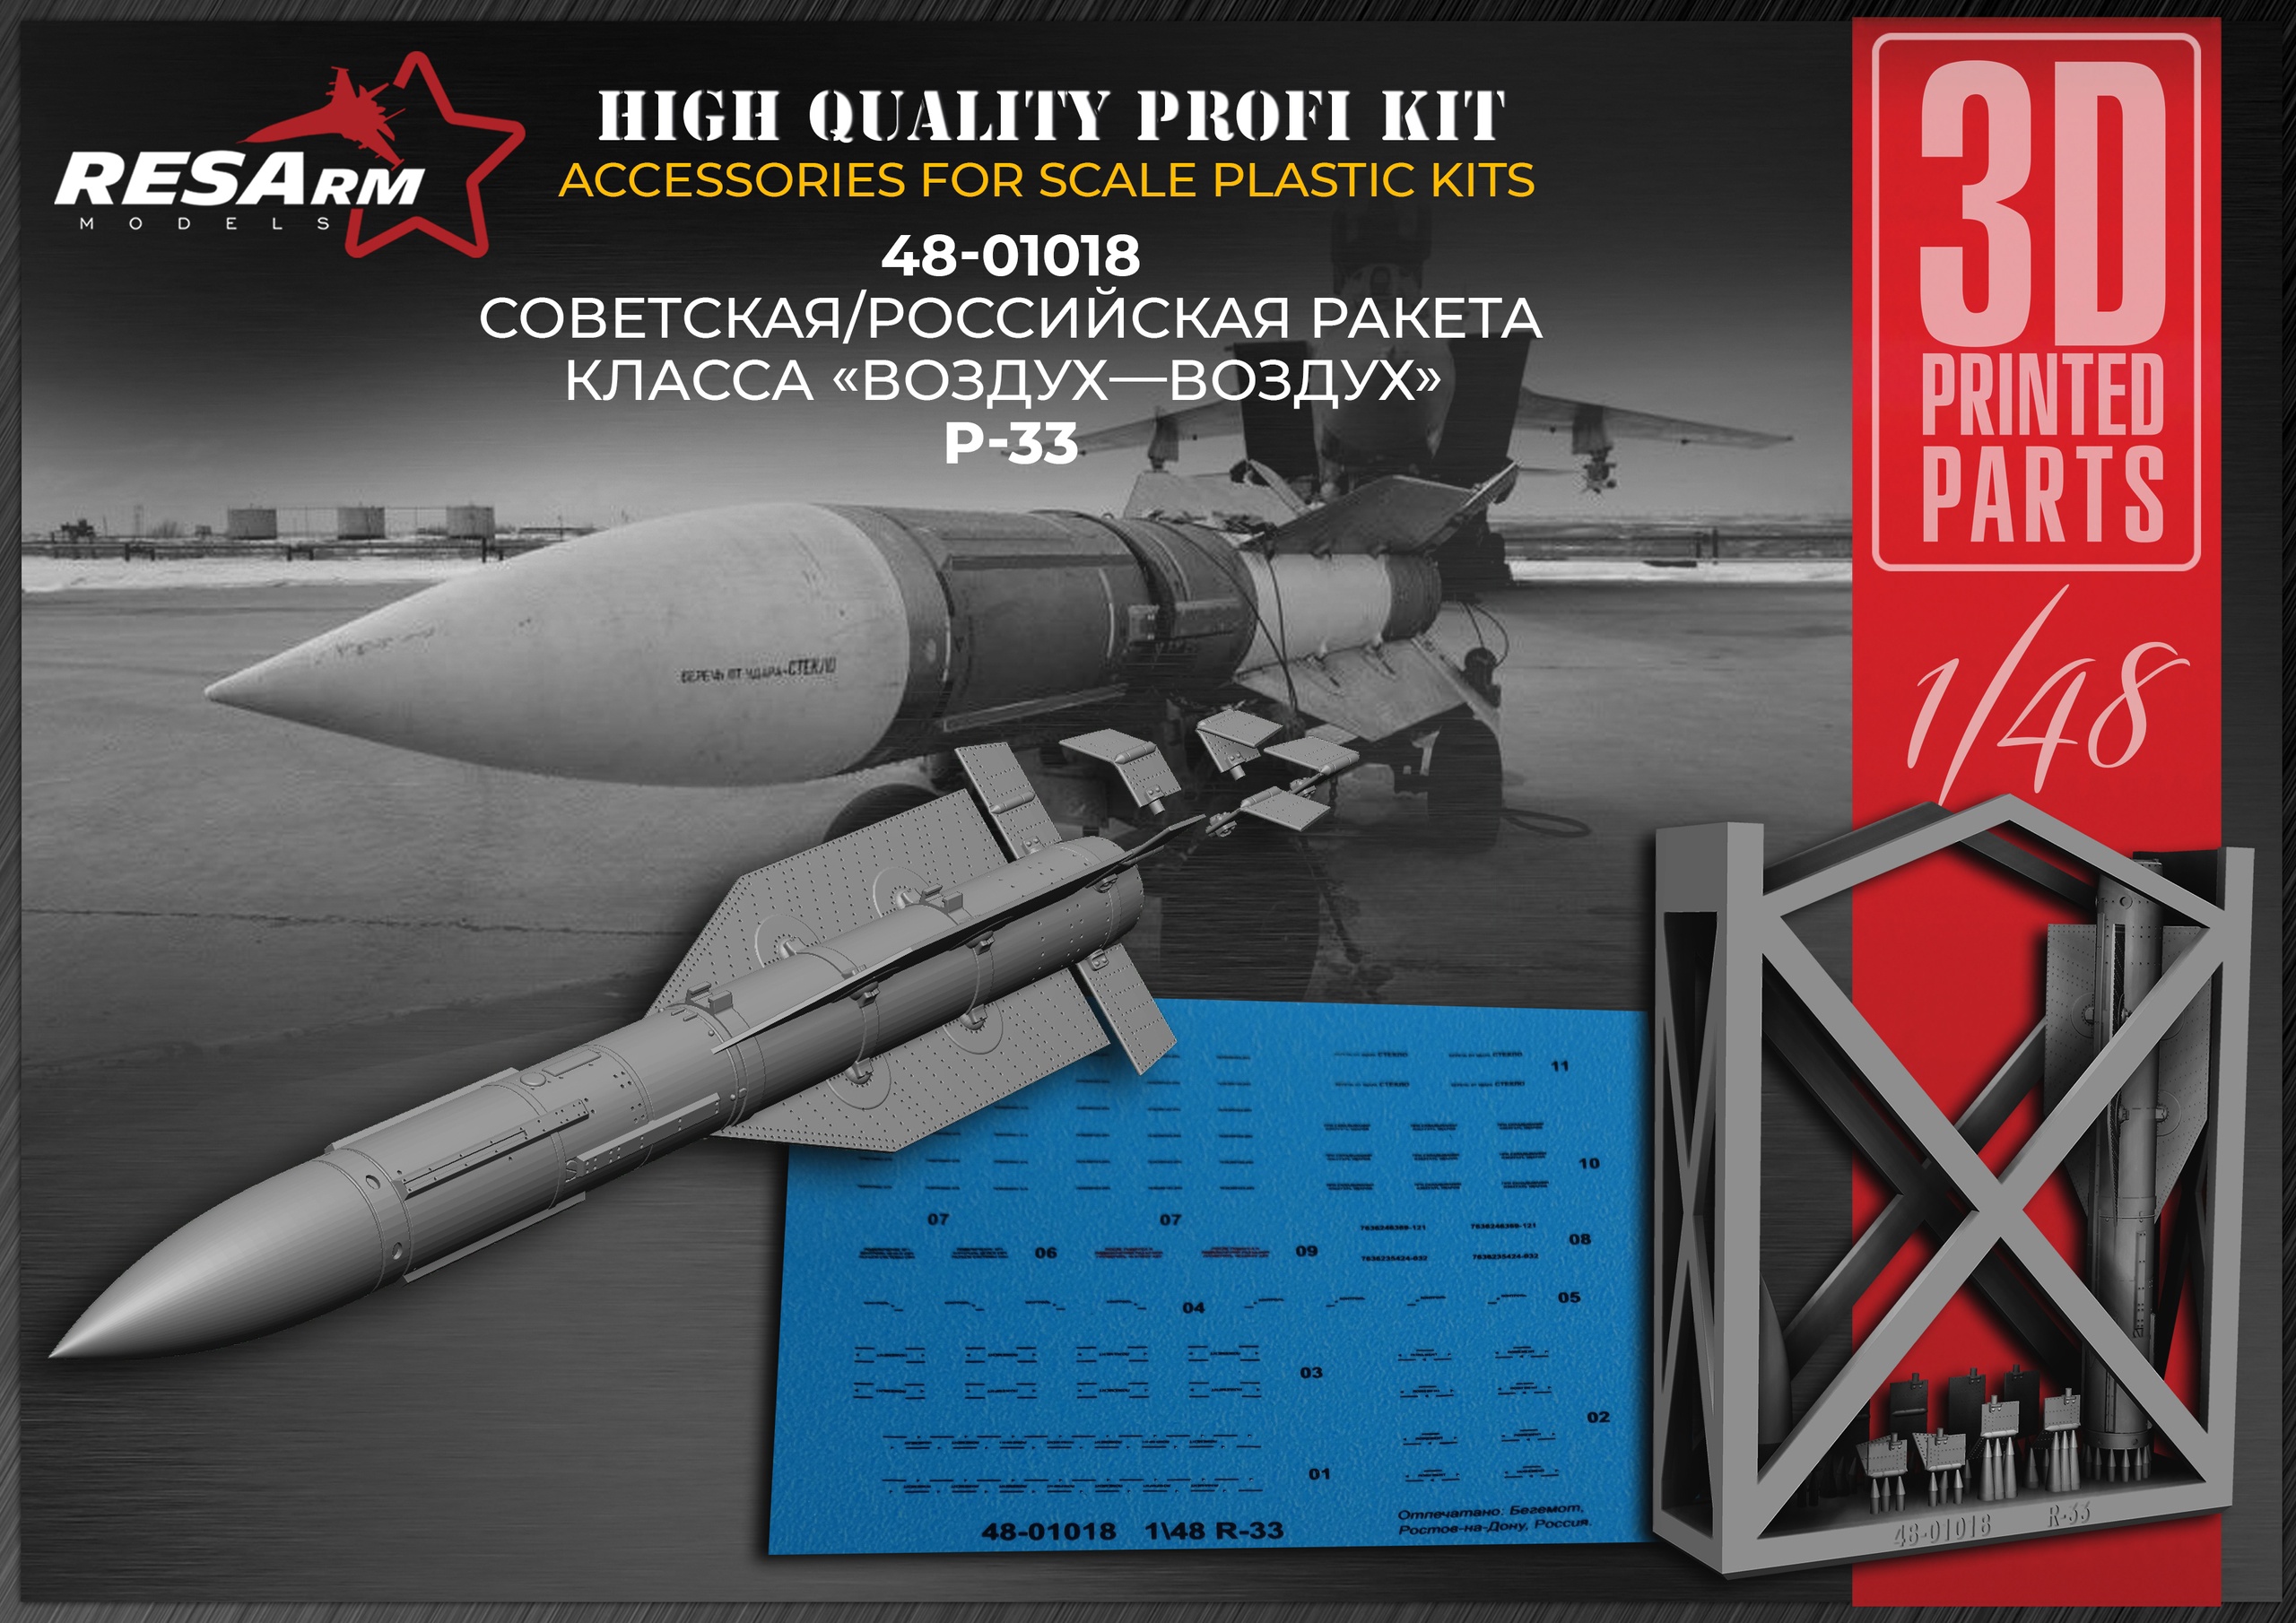 Additions (3D resin printing) 1/48 R-33 air—to-air missile (RESArm)